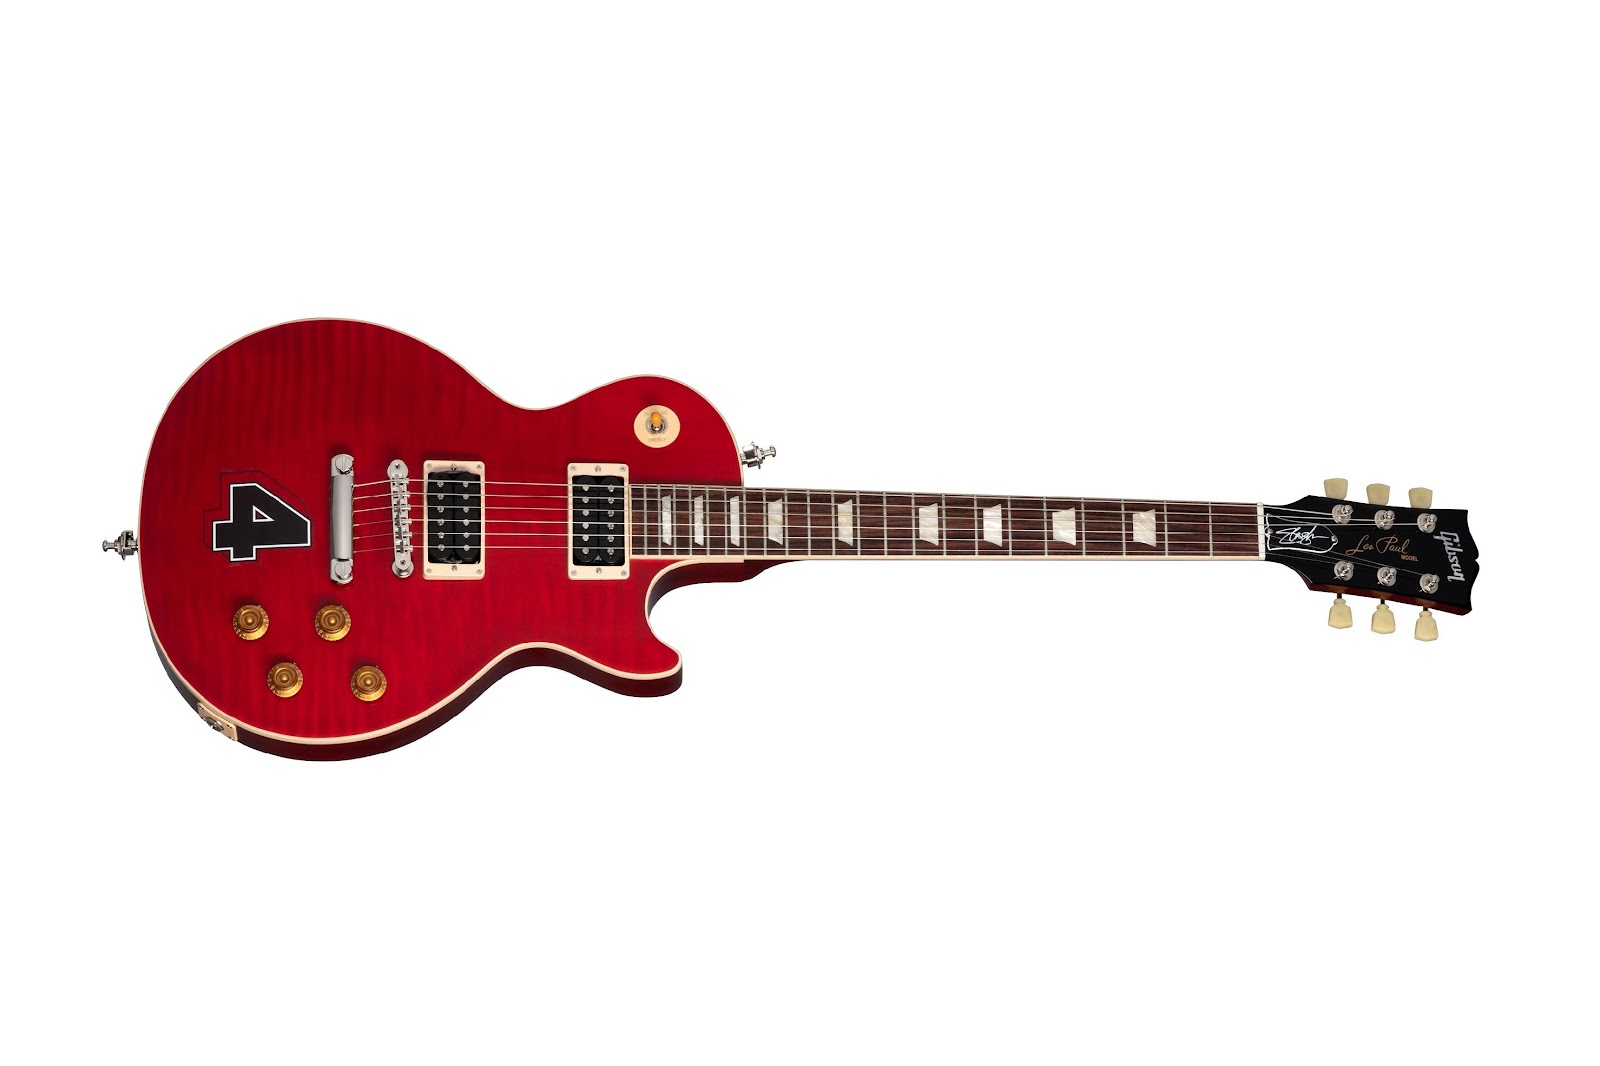 A red electric guitar

Description automatically generated with medium confidence